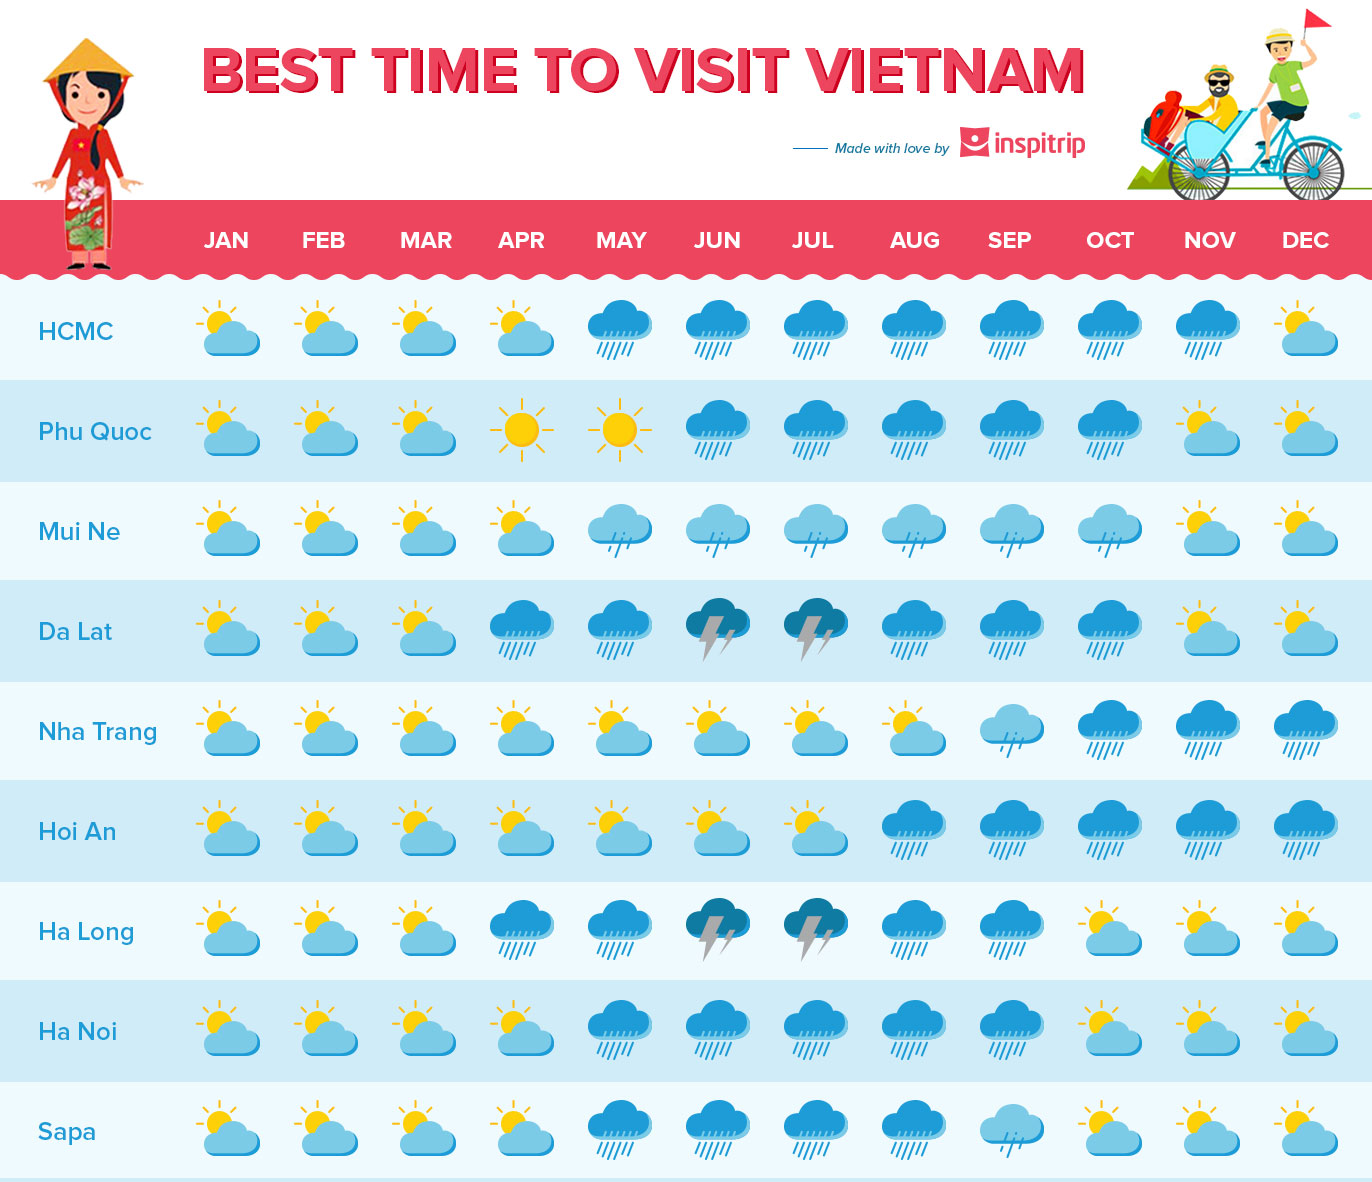 Best time to visit Vietnam Infographic